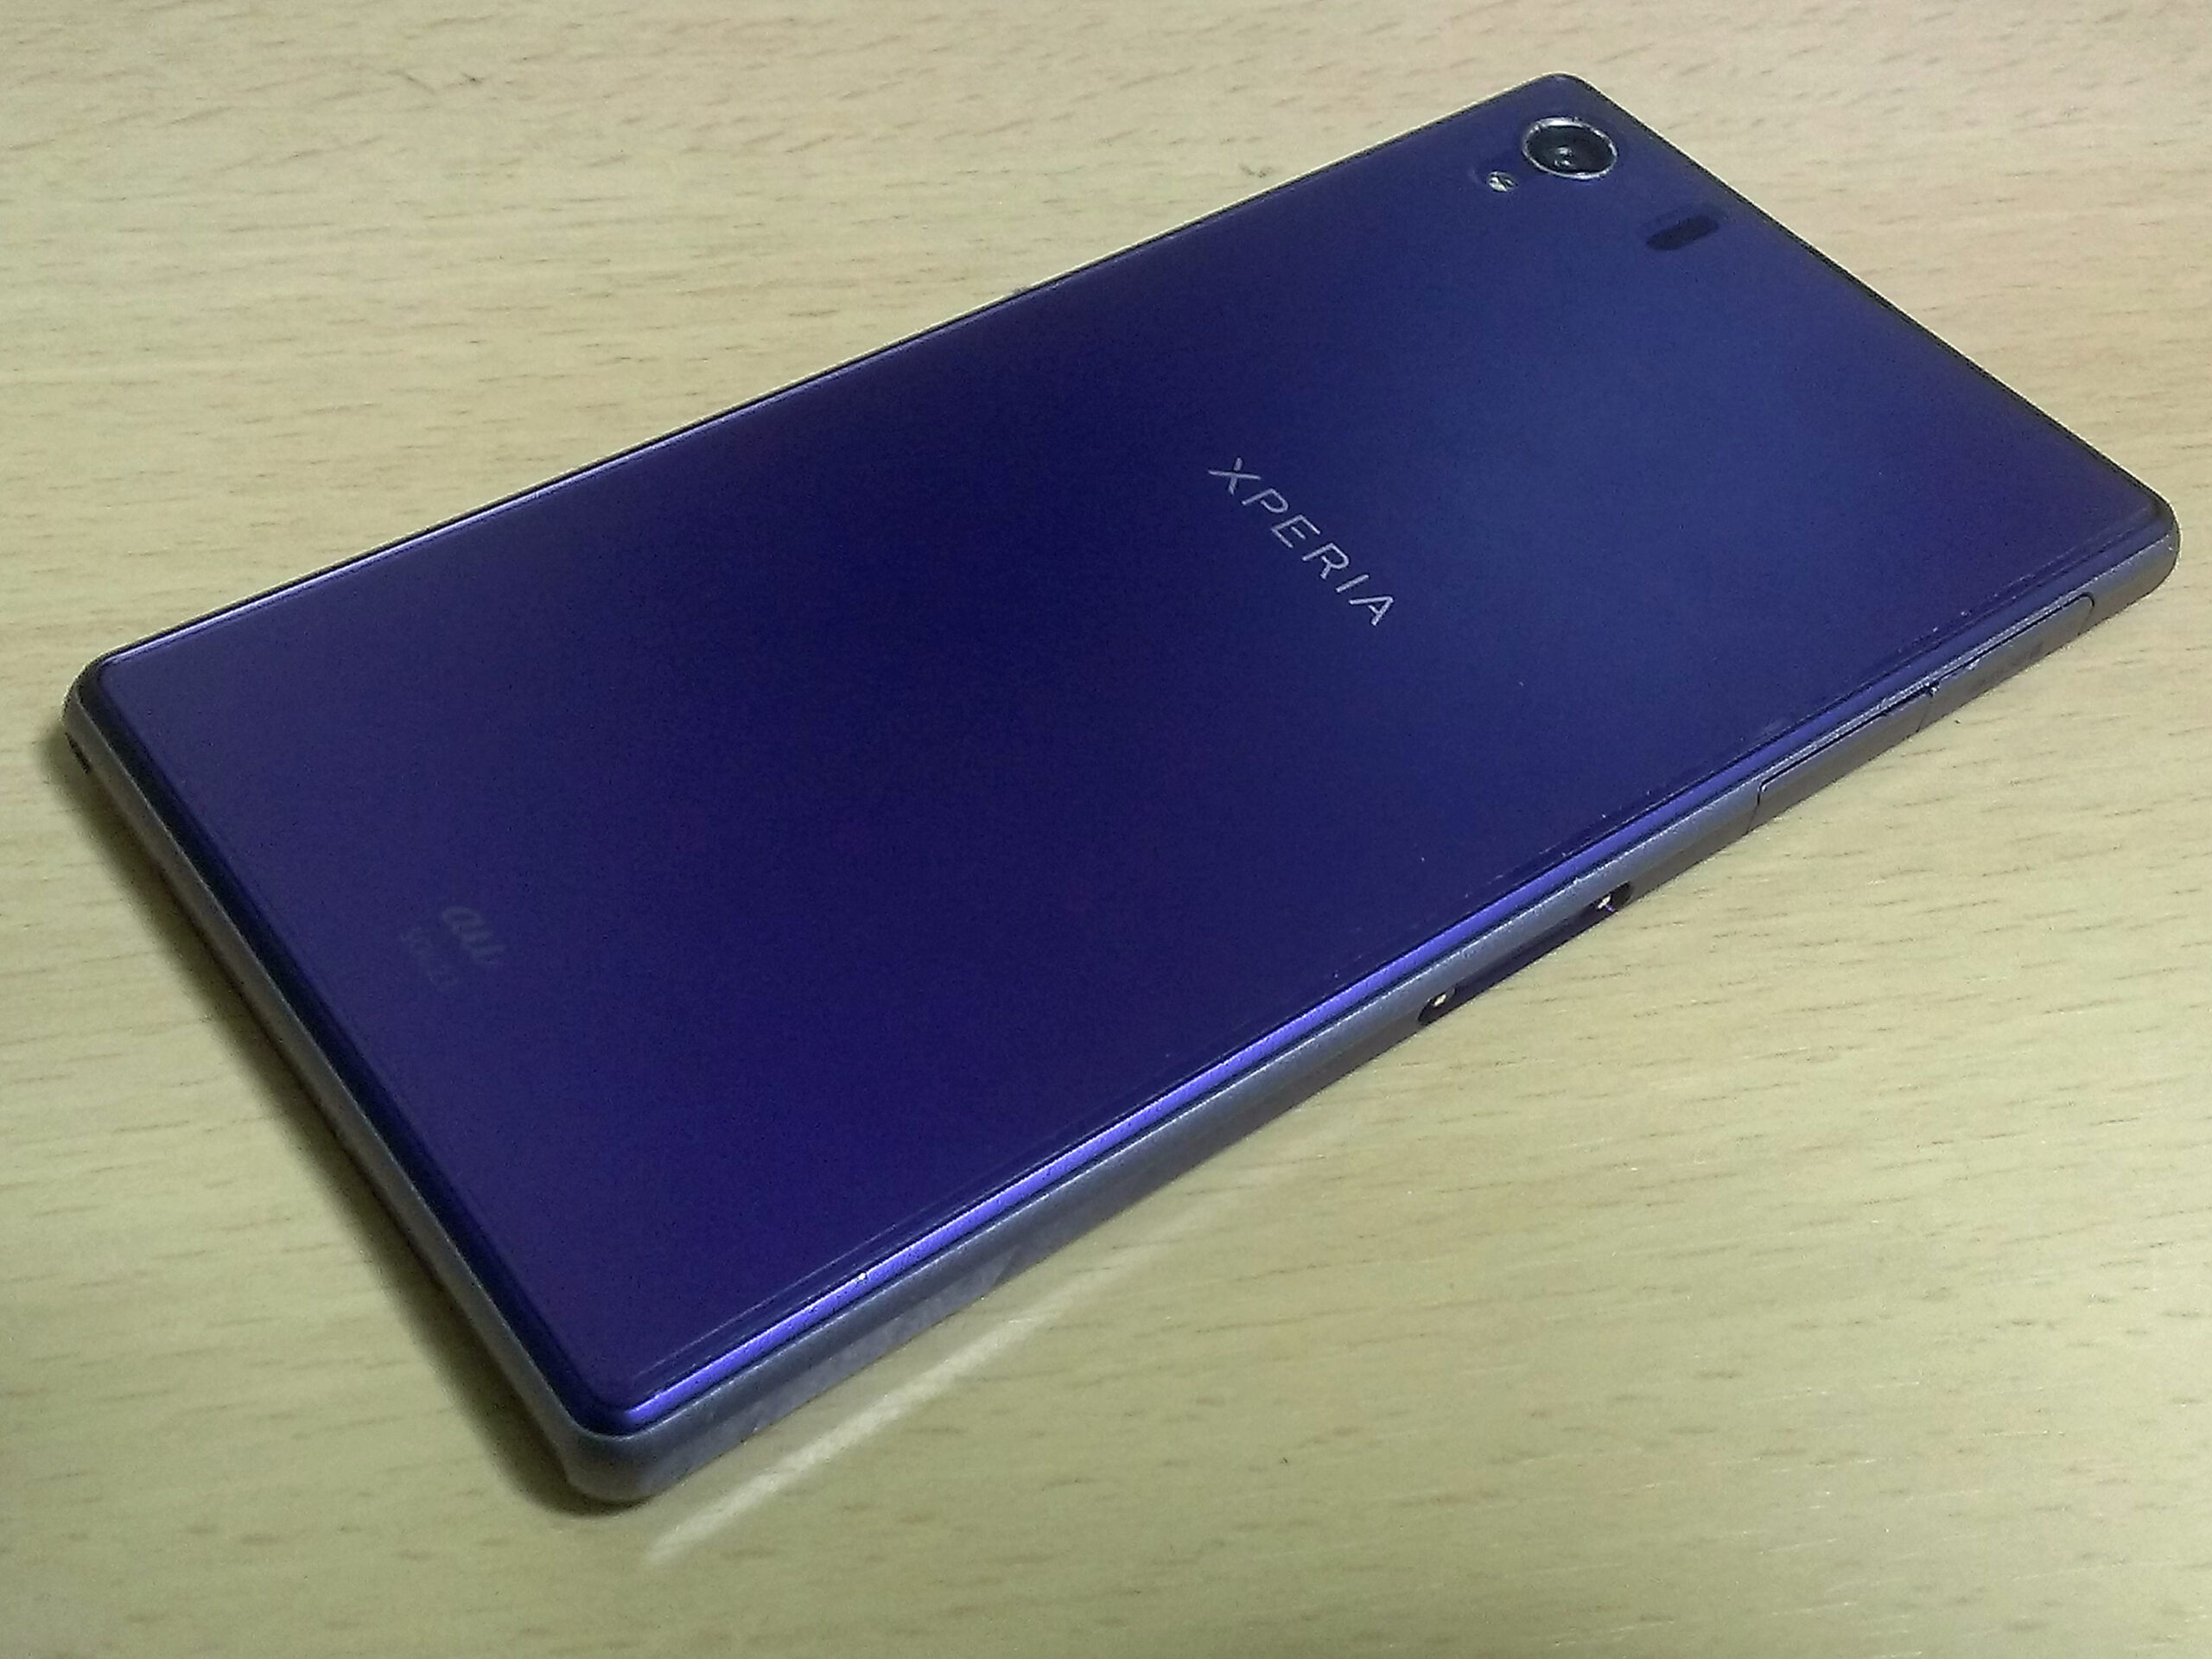 How to Root Xperia Z1 5.1.1 Lollipop Stock ROM